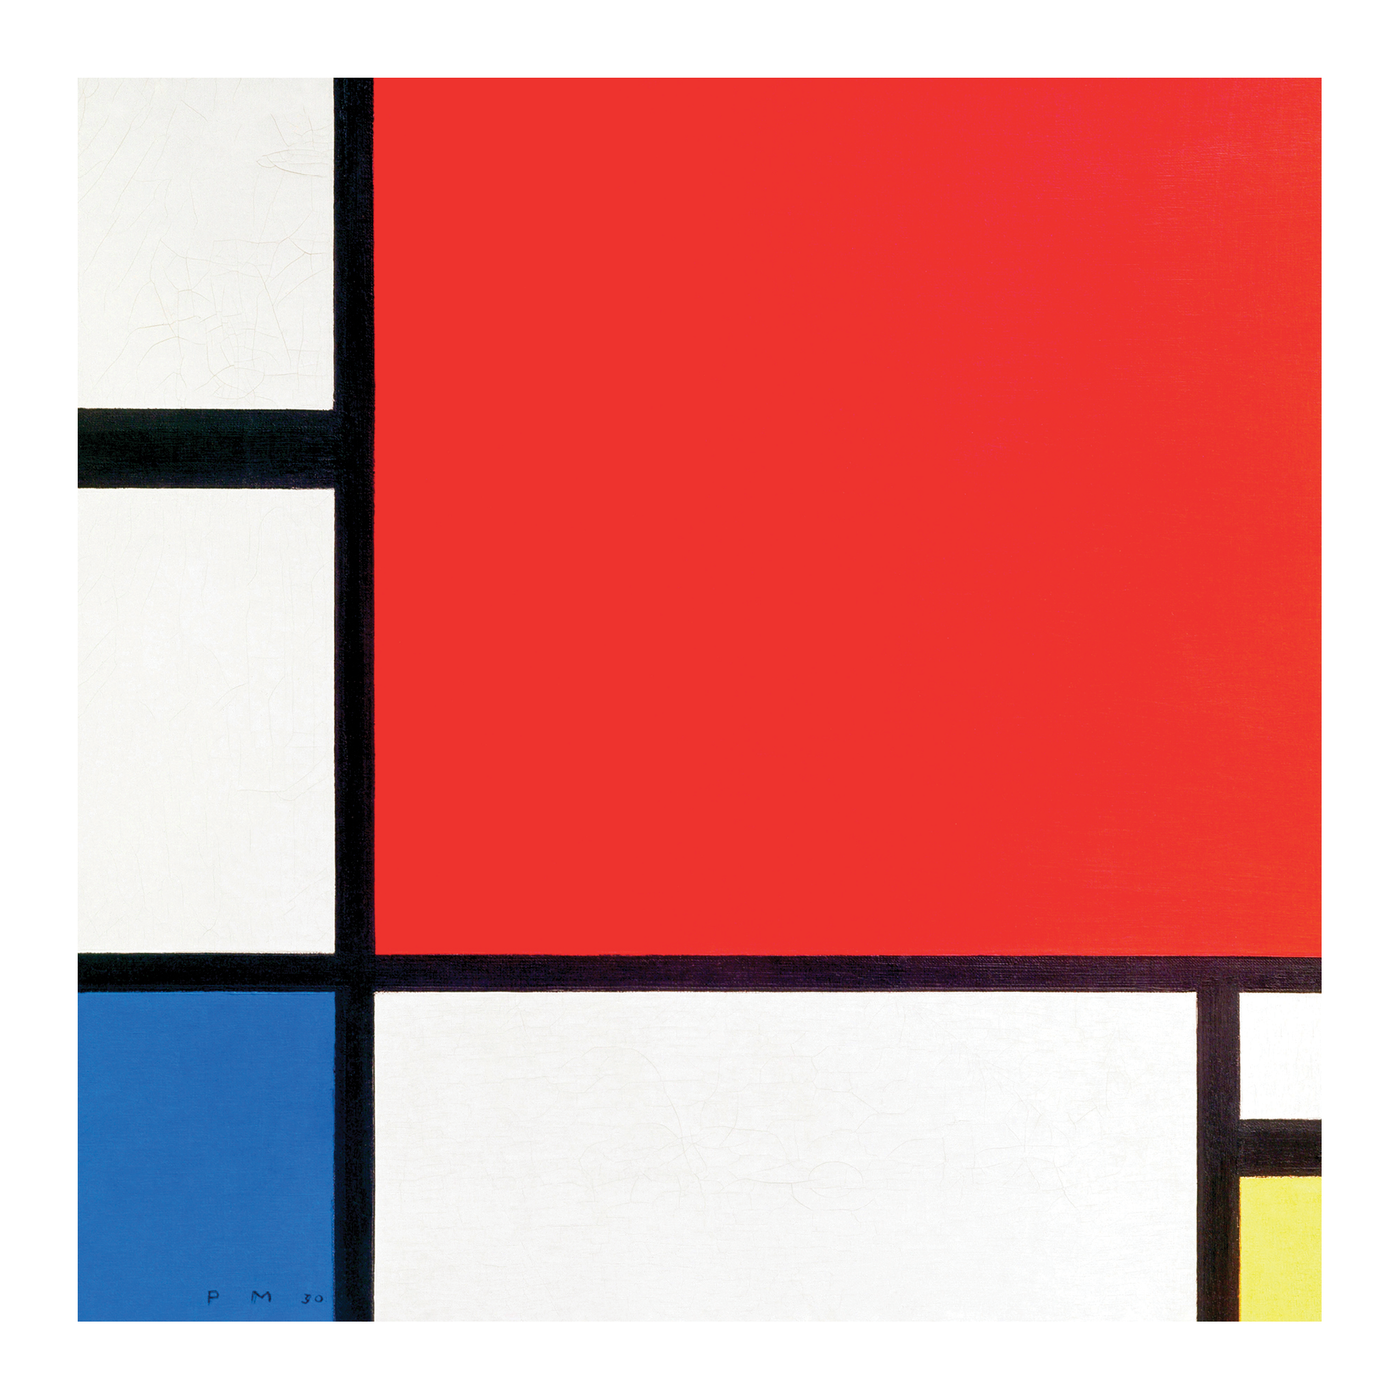 Set of 5: Zero Plastic | Piet Mondrian - 'Composition with Red, Blue and Yellow' - Plastic-Negative Art Greetings Card (15 x 15 cm - Single Design)